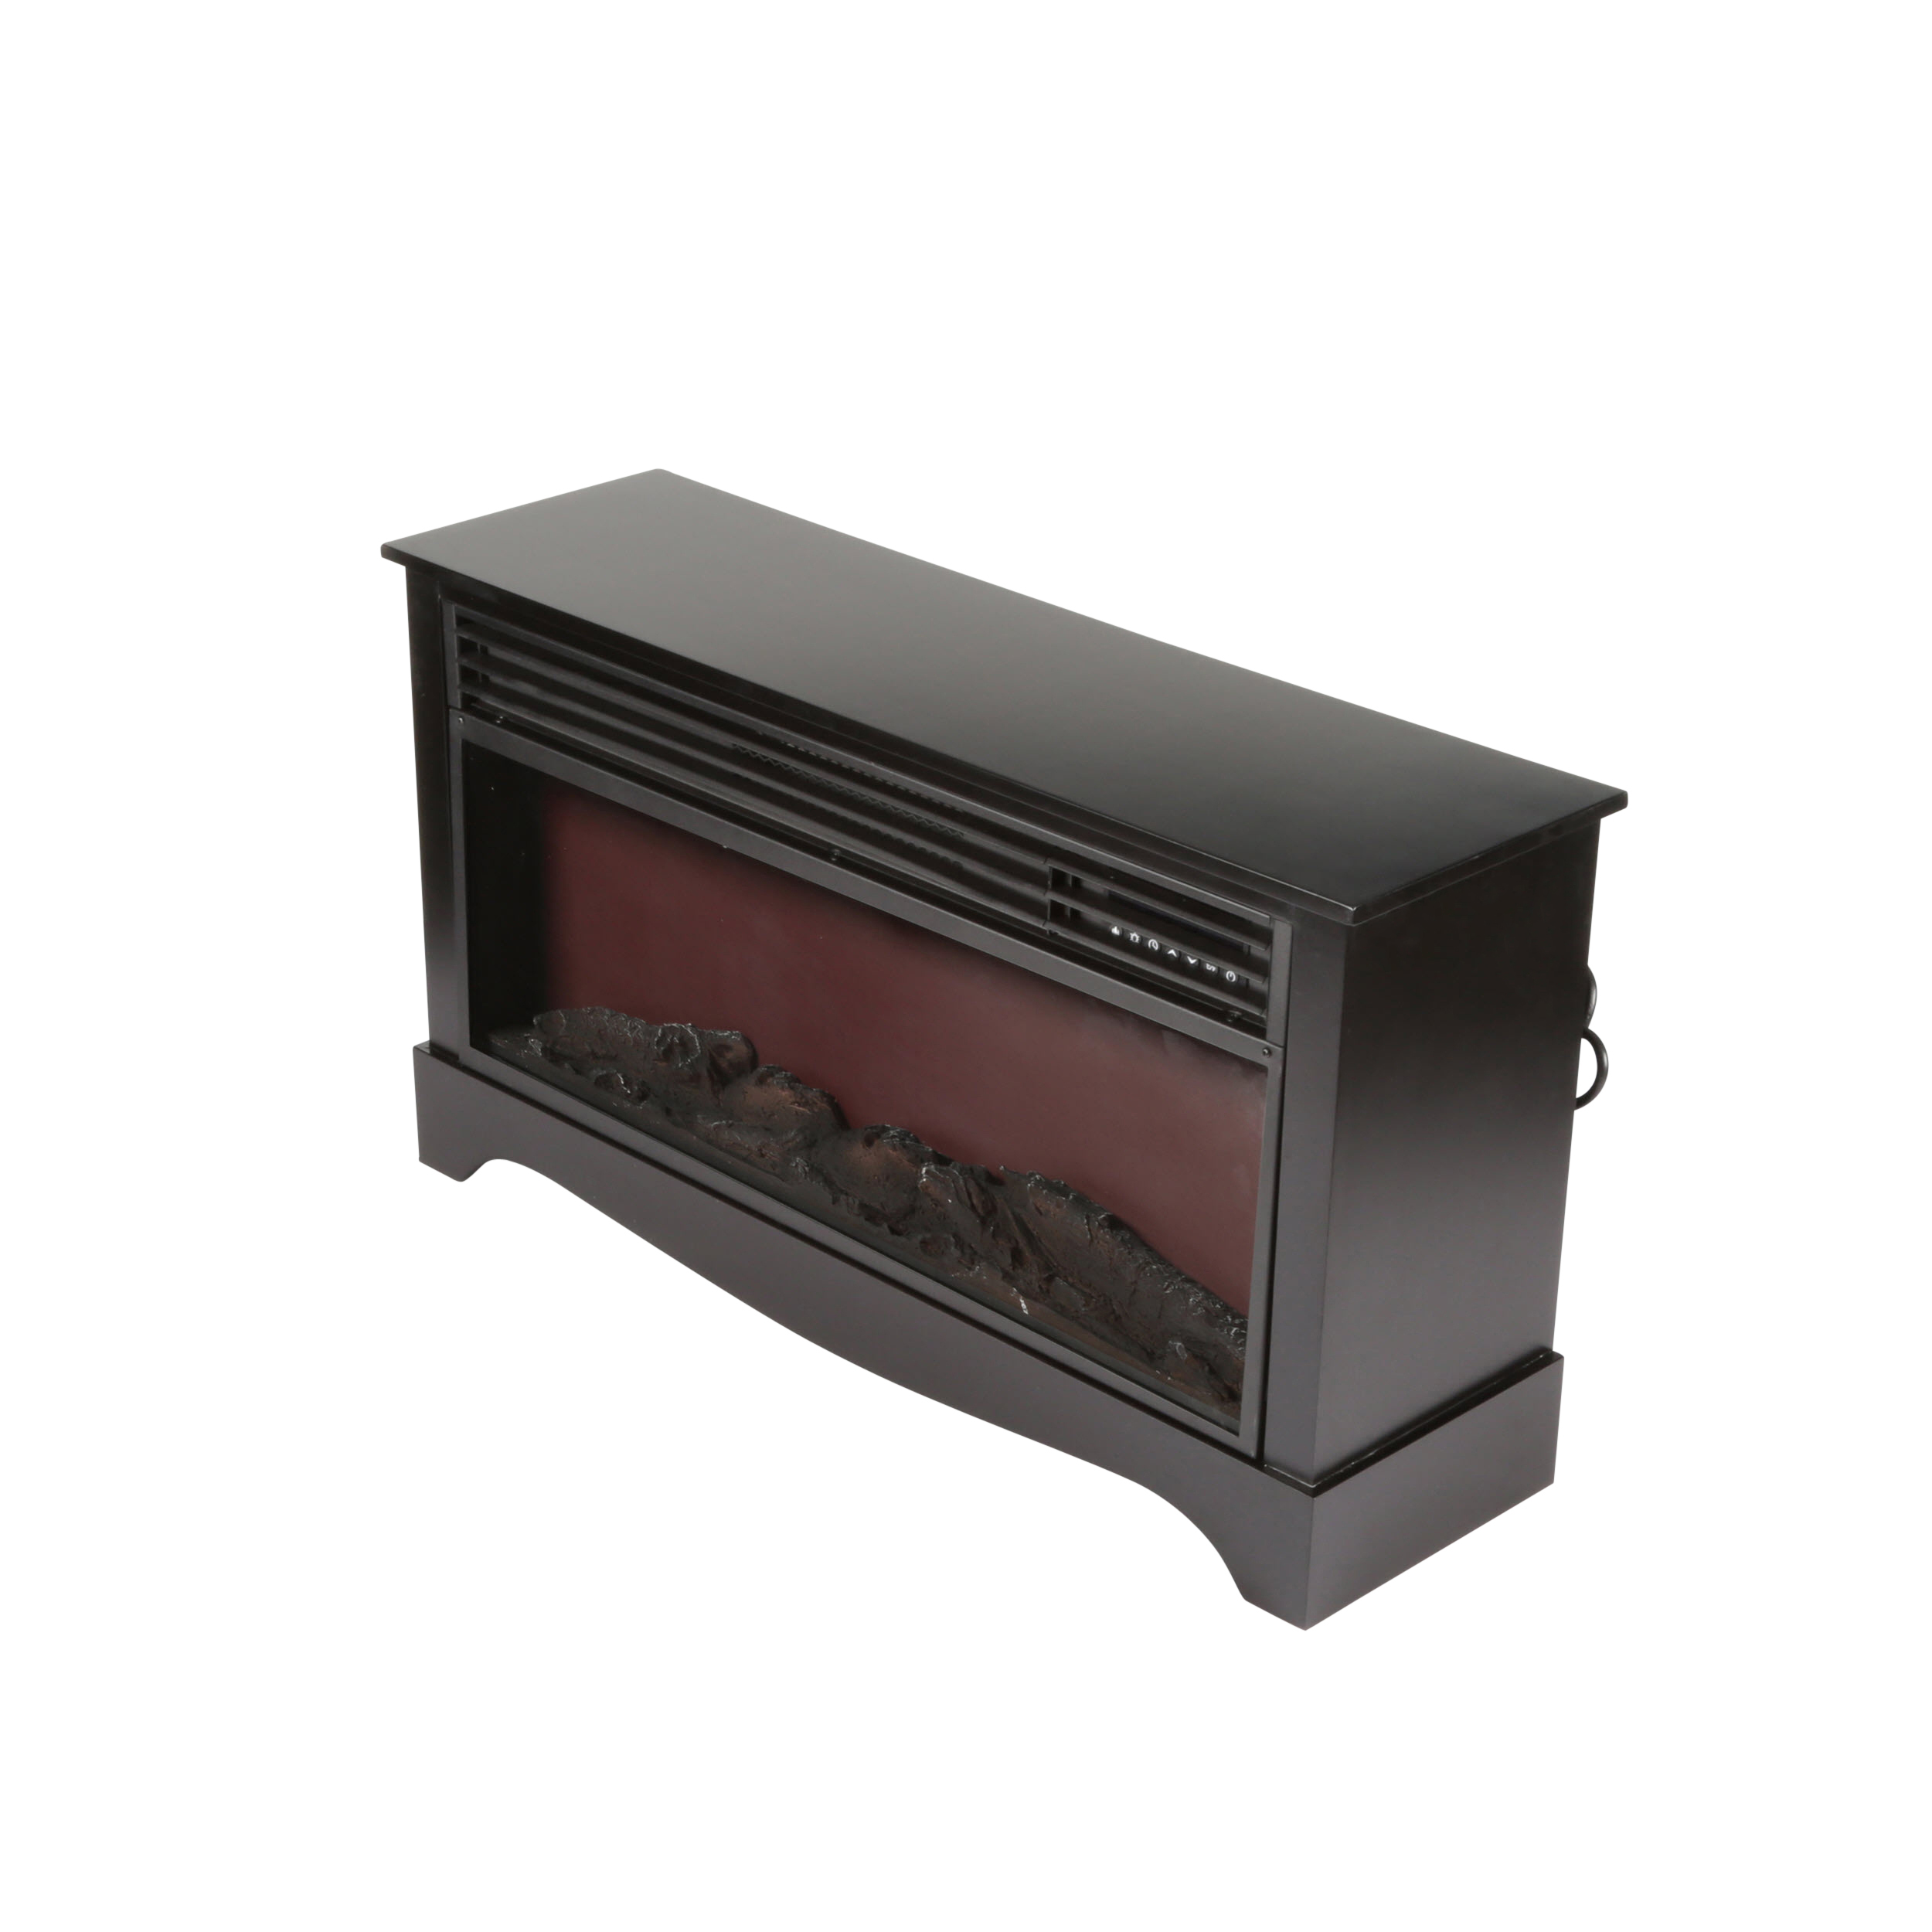 Lifesource 20" Tall Heater Fireplace with Color-Change LED Affect, Black Cabinet - image 5 of 5